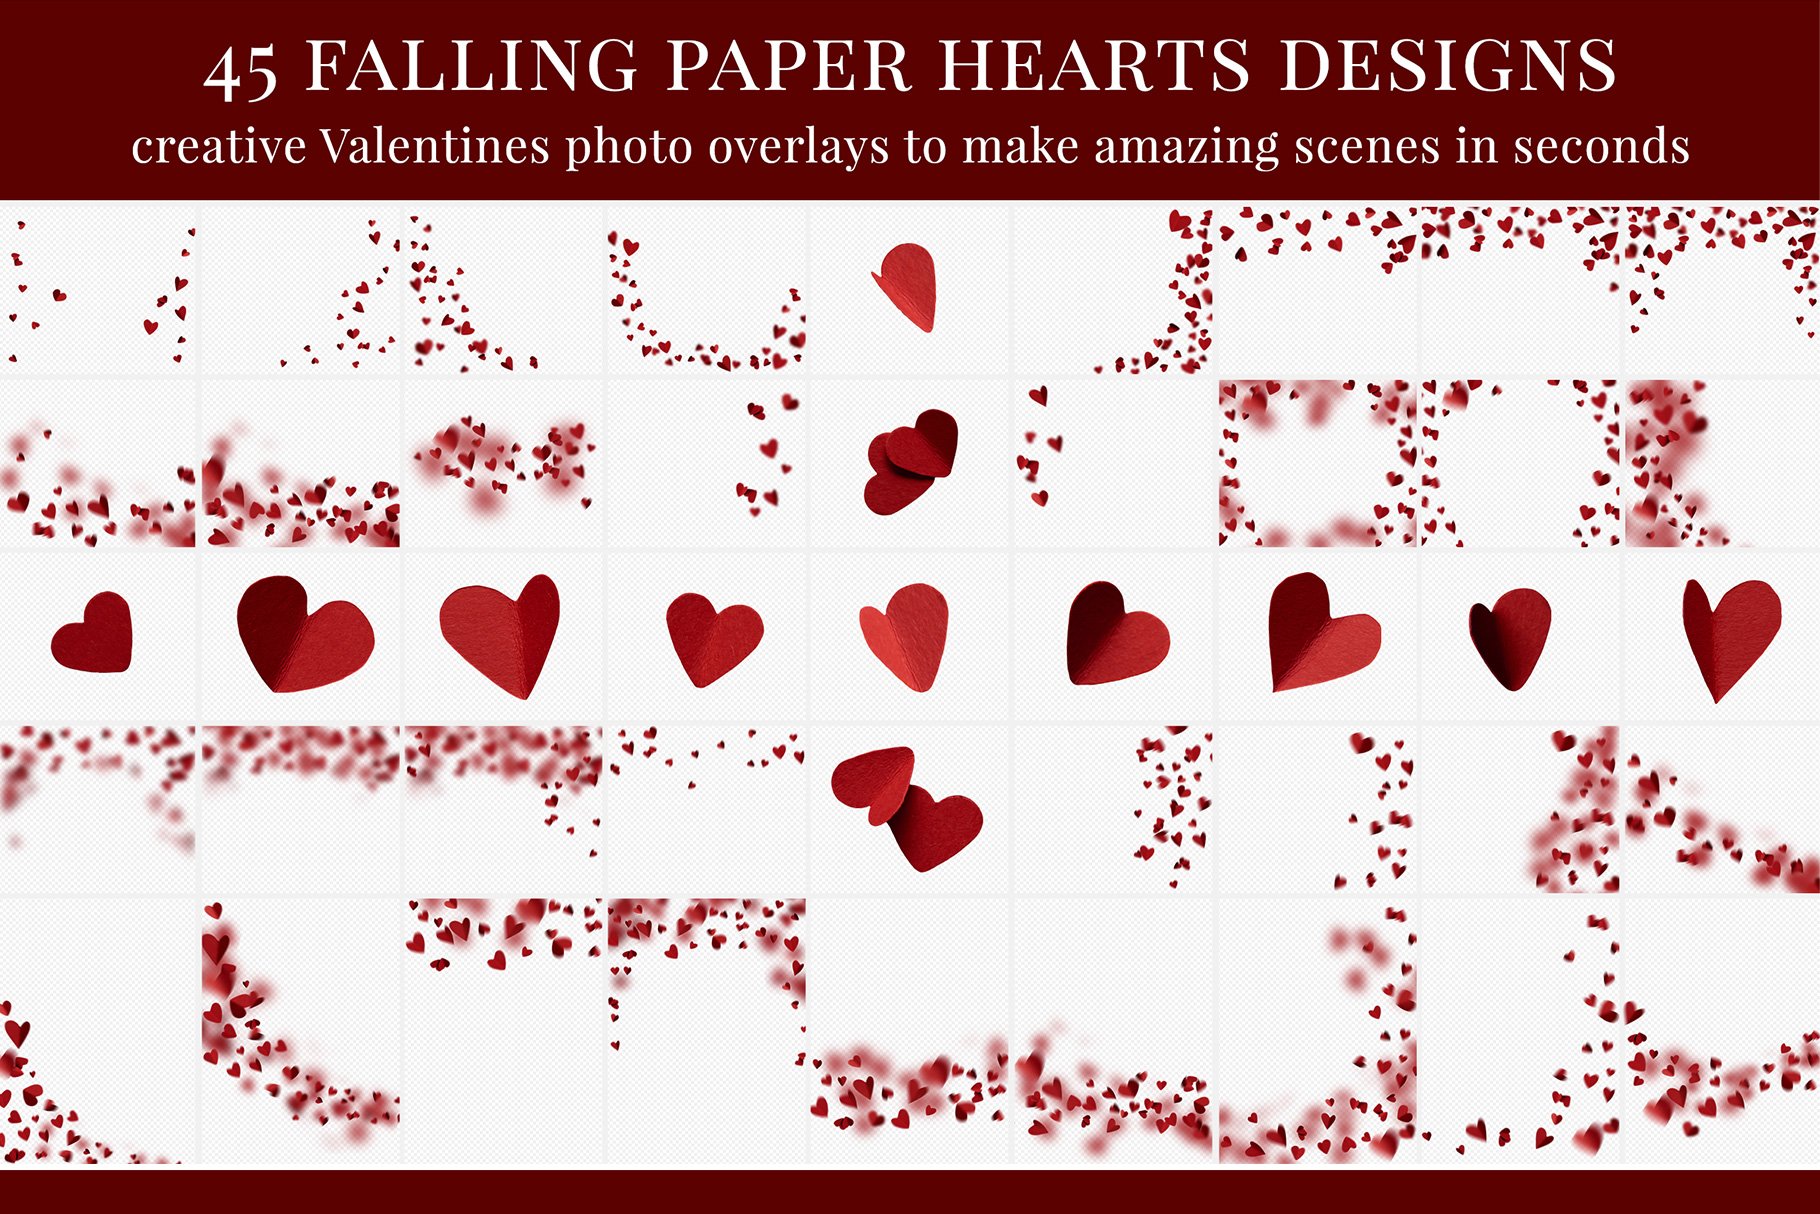 Falling Paper Hearts photo overlayspreview image.